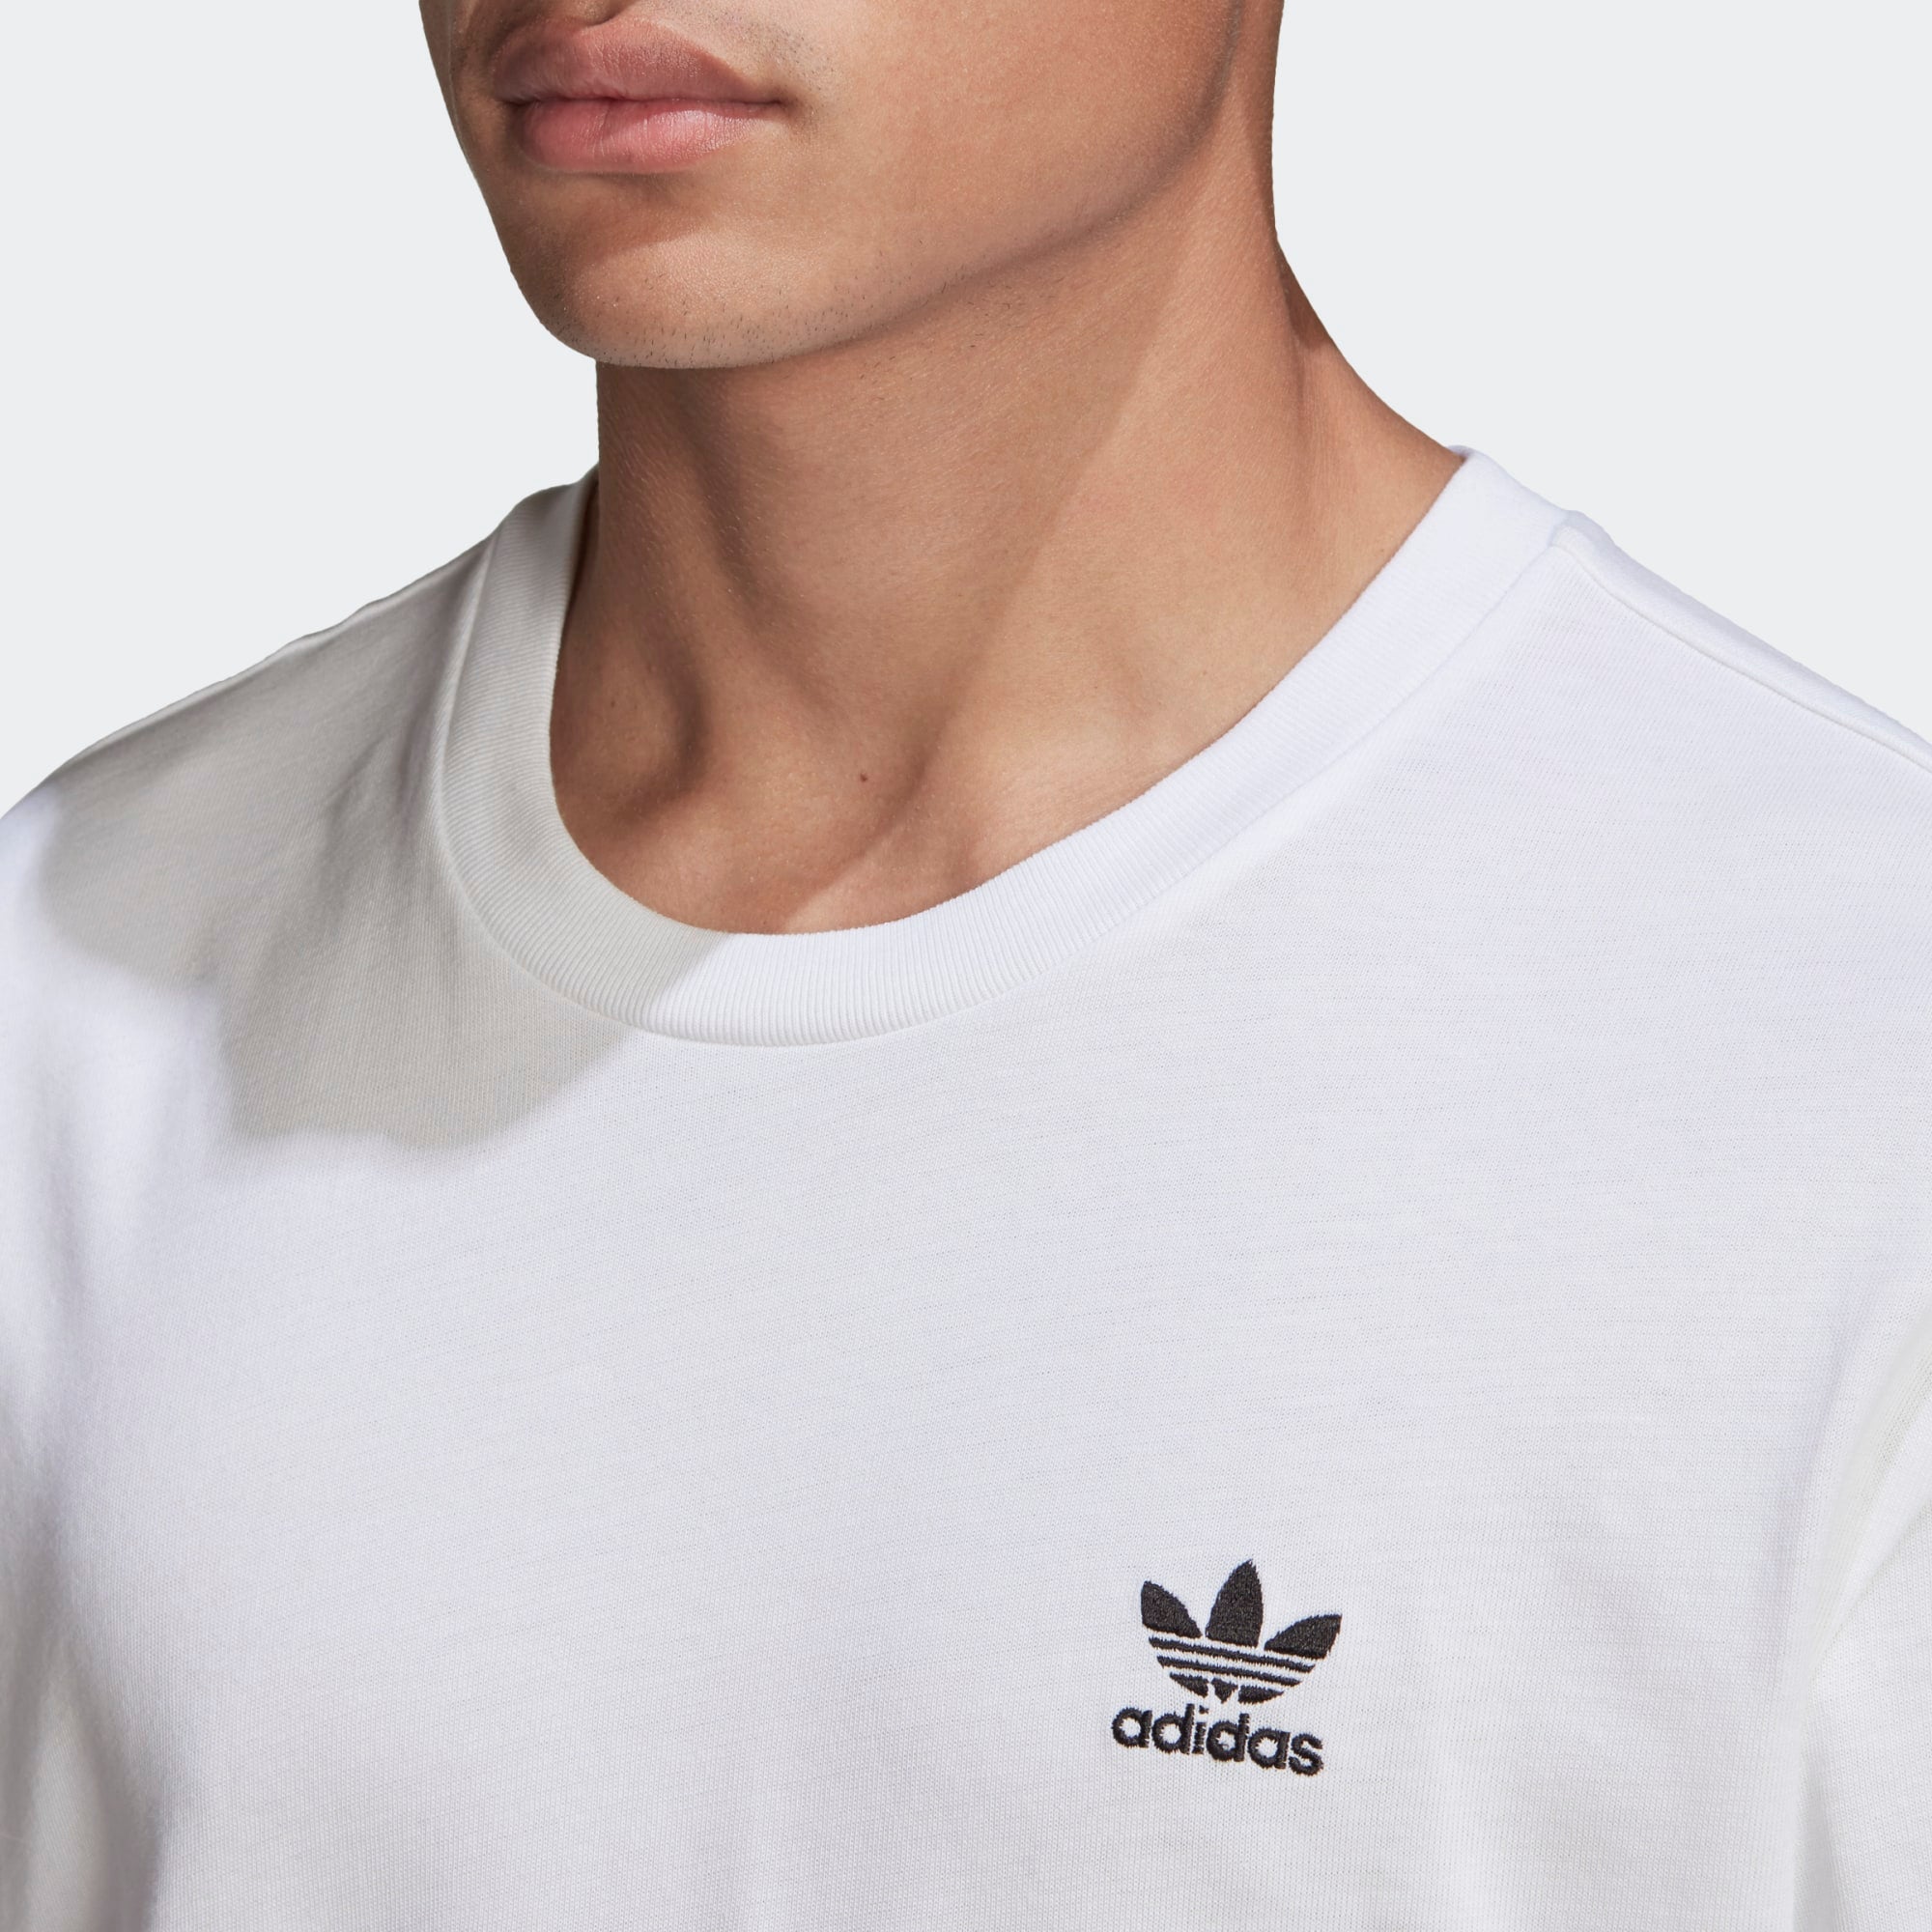 Logo Tee Embroidered PH Adidas Merch Trilogy – Adicolor Classics Boxy (White)(GN3453)